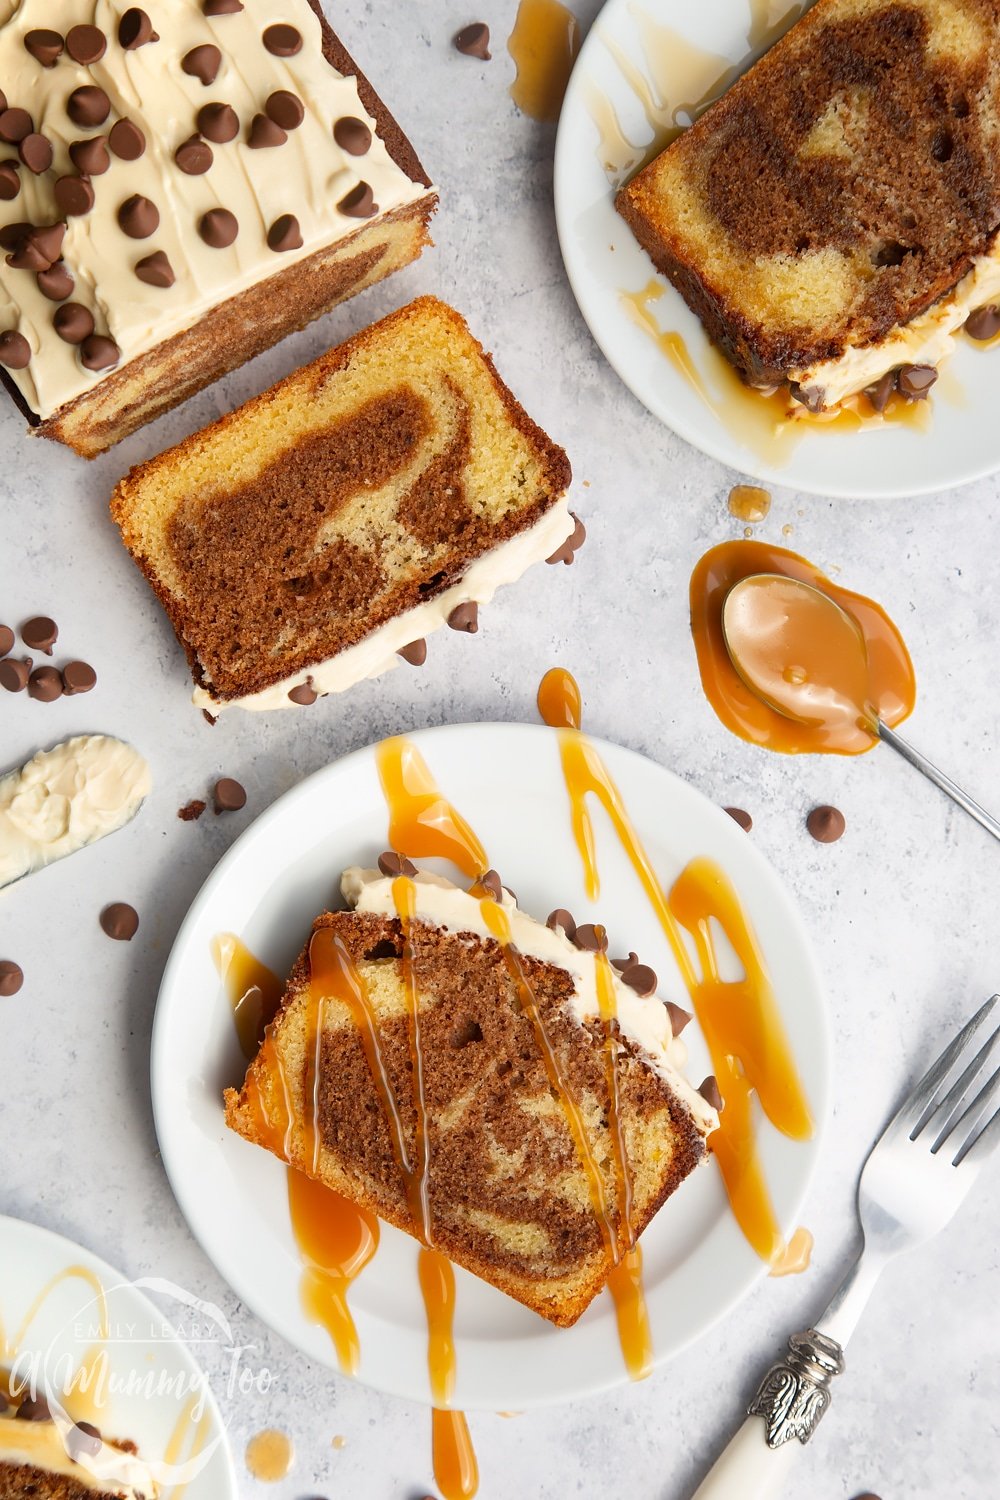 Chocolate marble cake with a salted caramel cream cheese frosting, shown drizzled with warmed caramel sauce